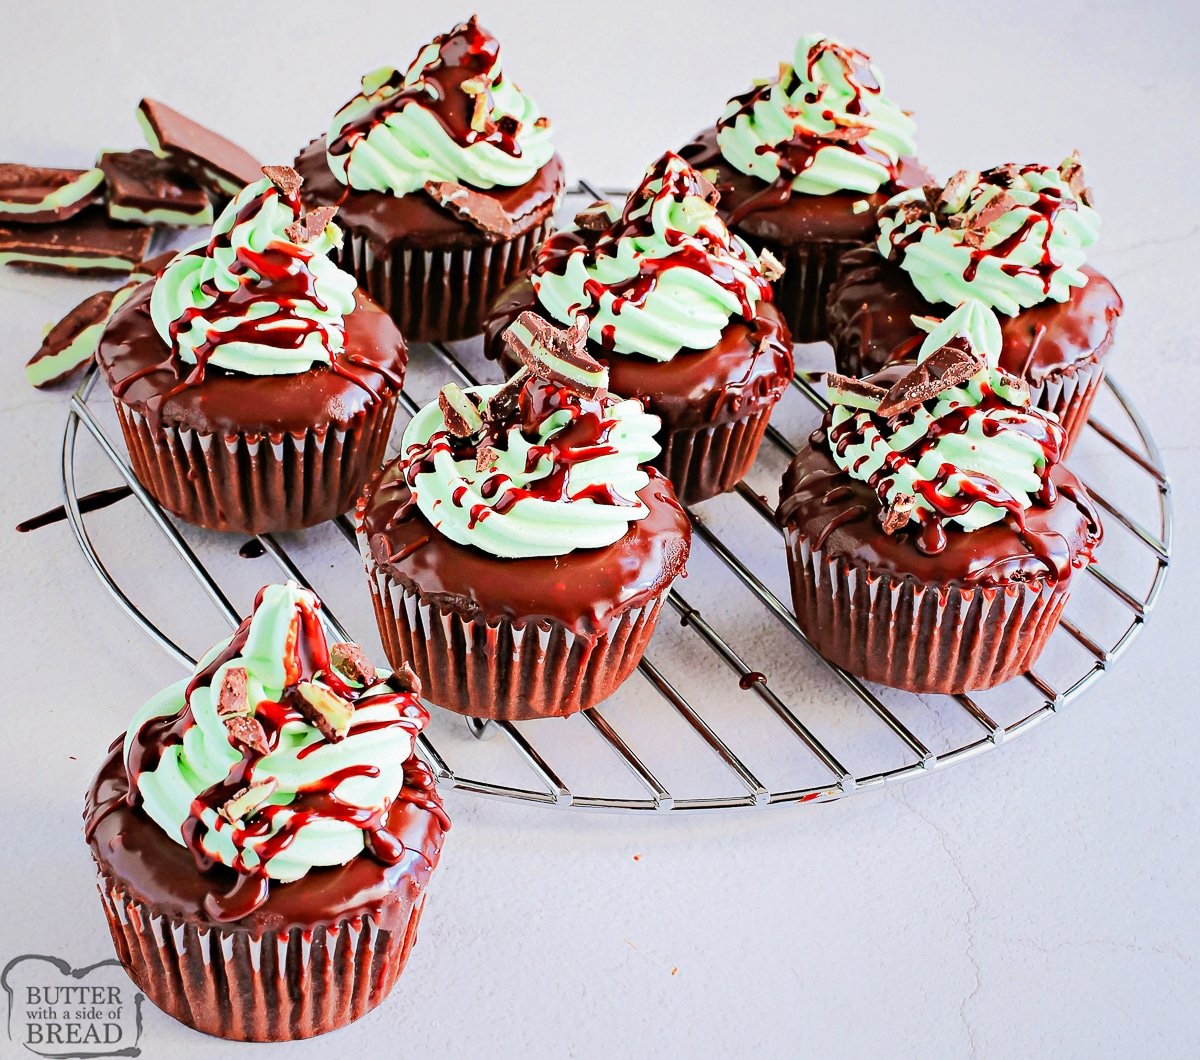 chocolate mint cupcakes made from a box mix